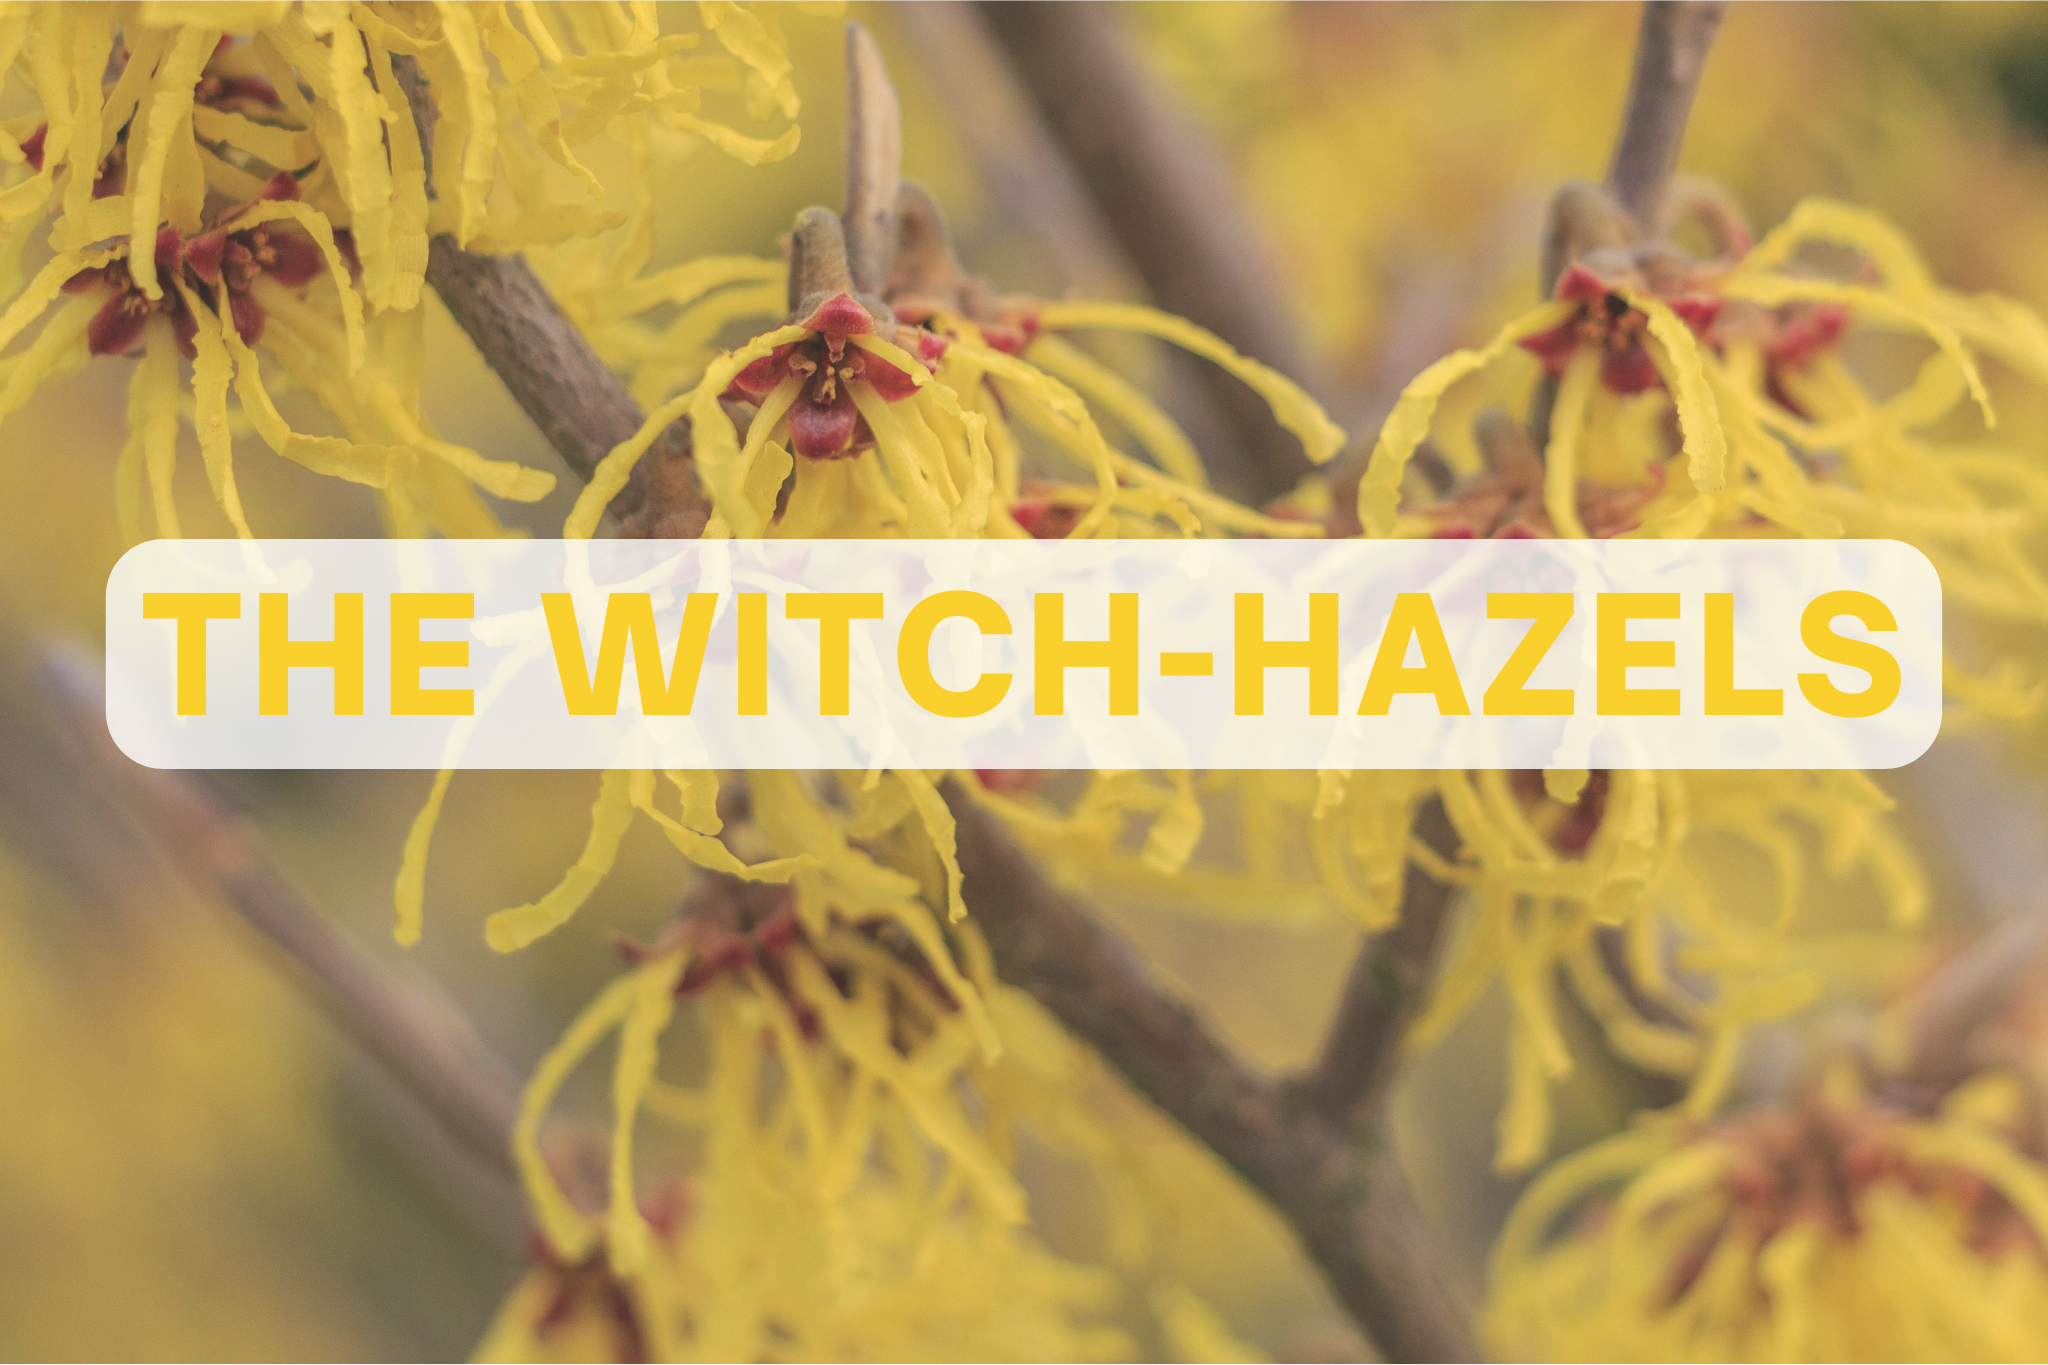 The Witch-hazels